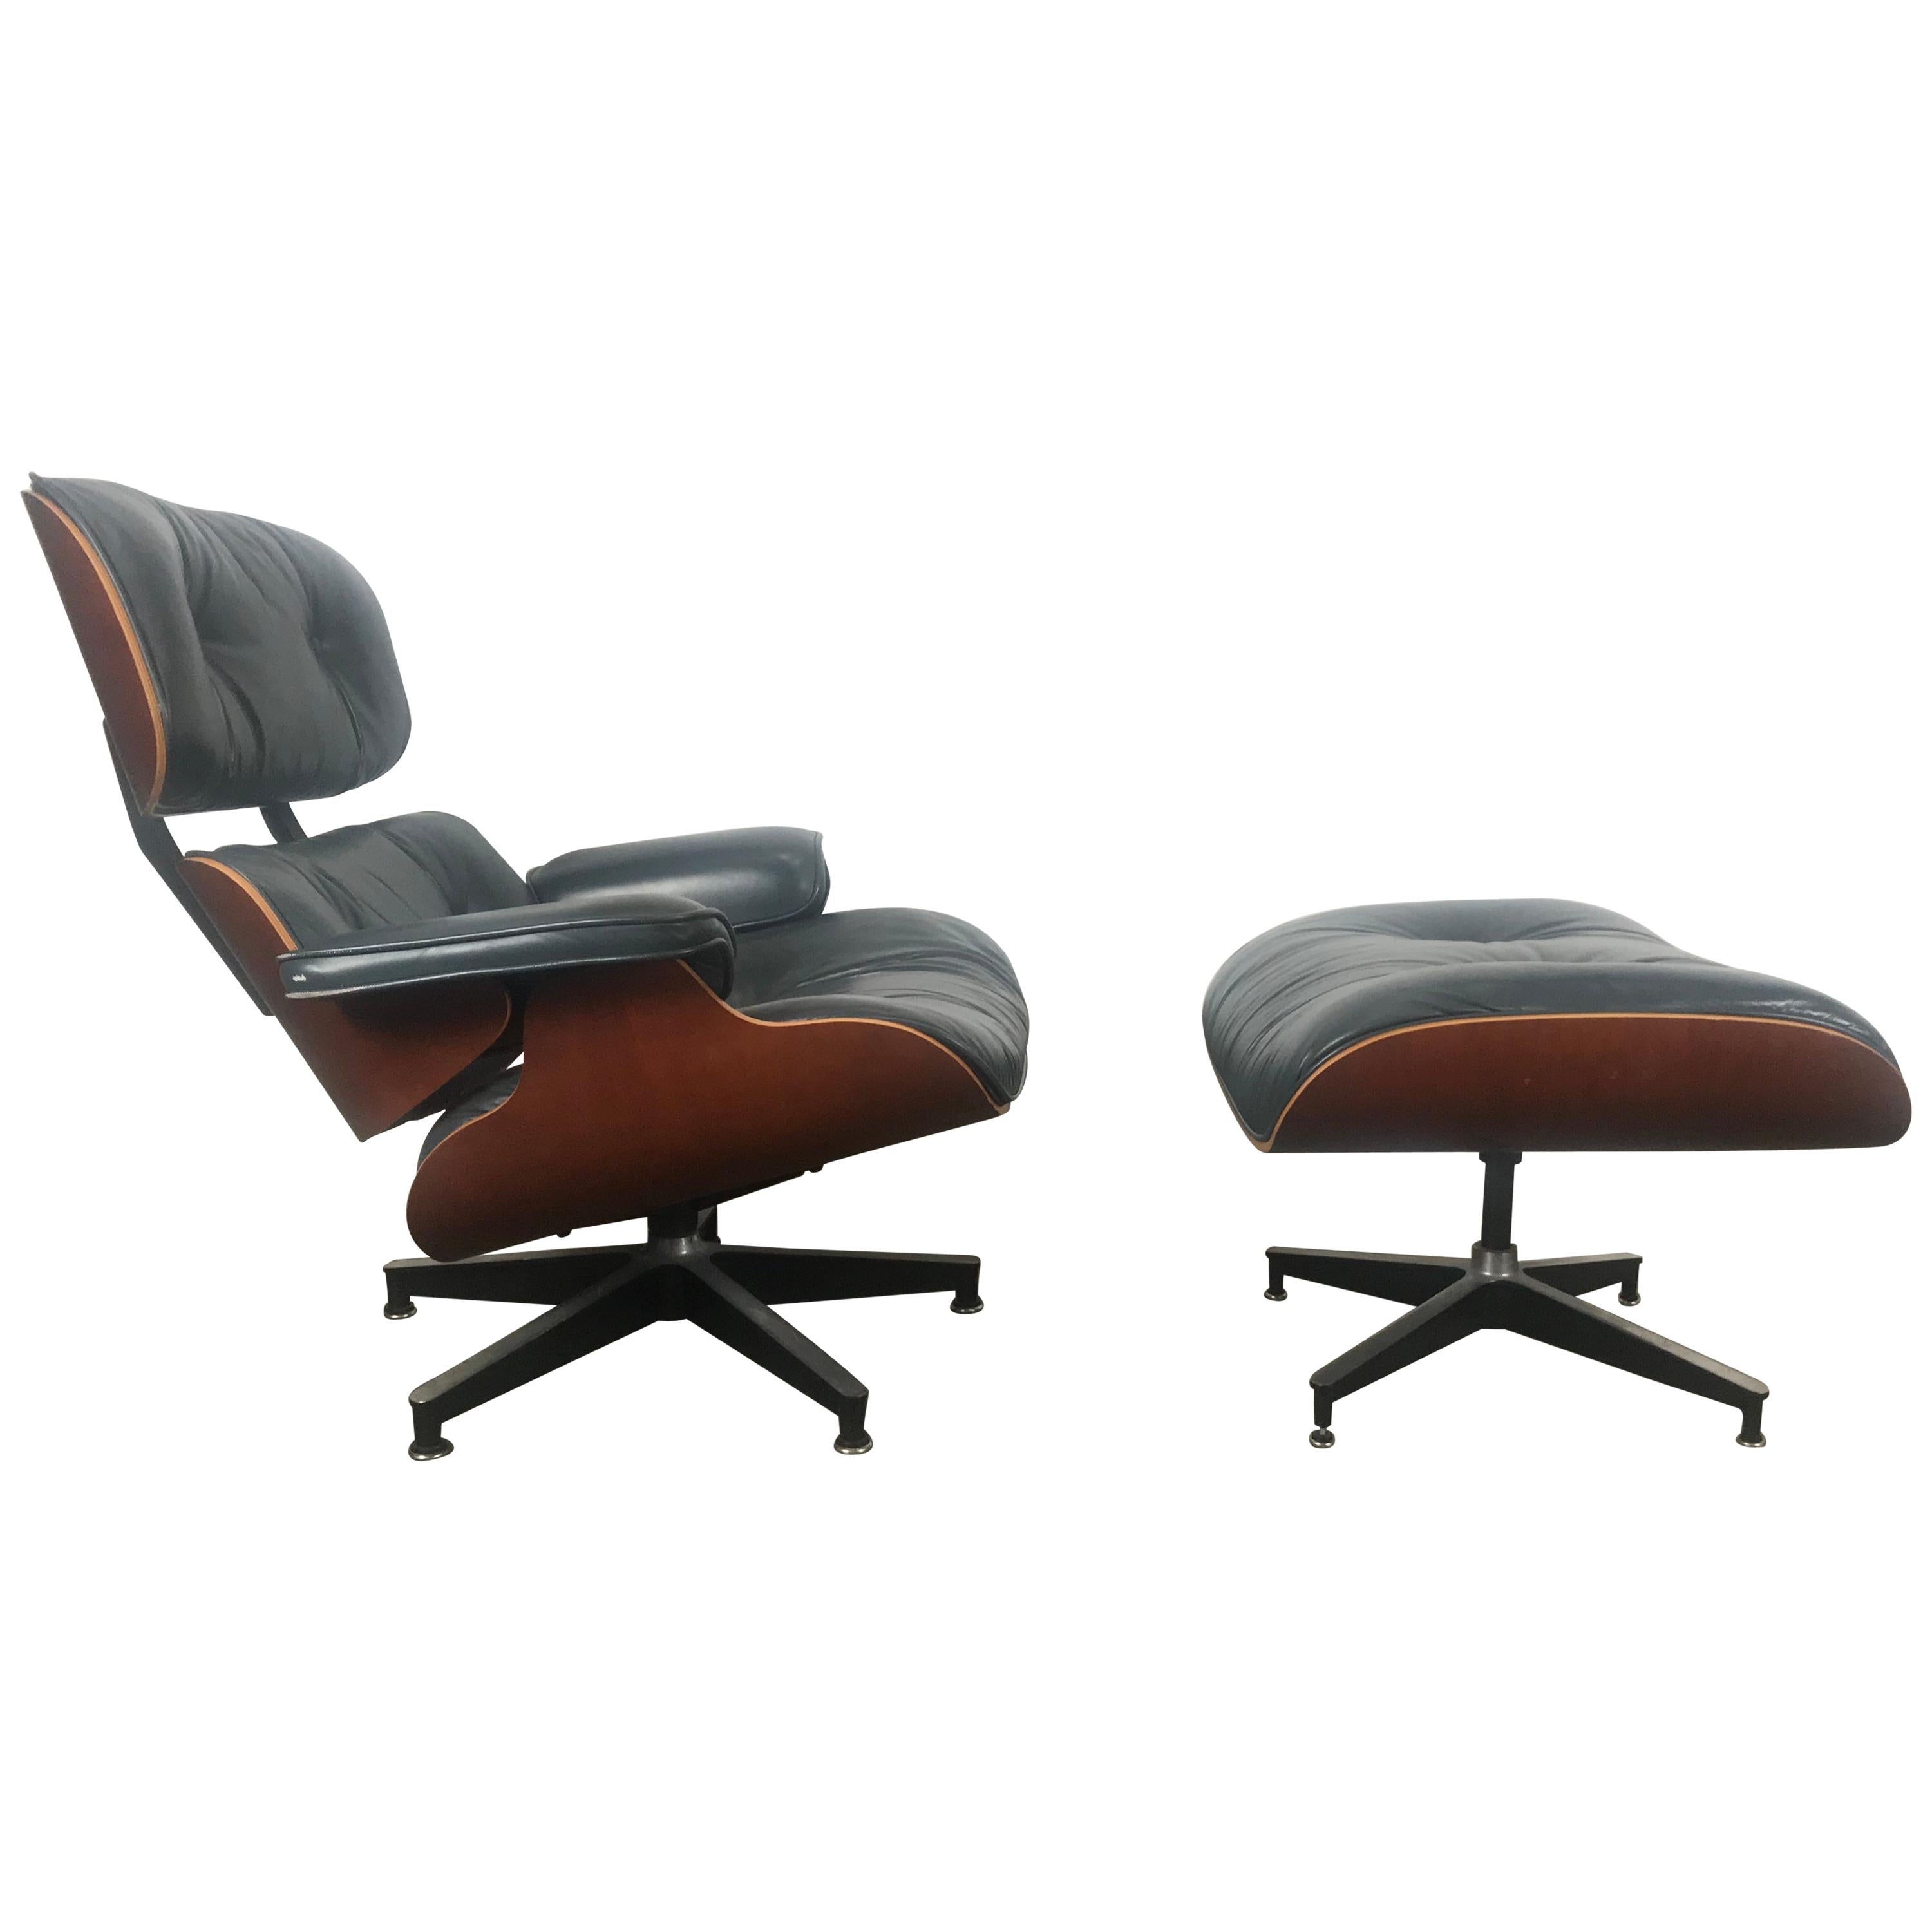 Stunning Custom Order Lounge Chair and Ottoman by Charles Eames, Blue Leather